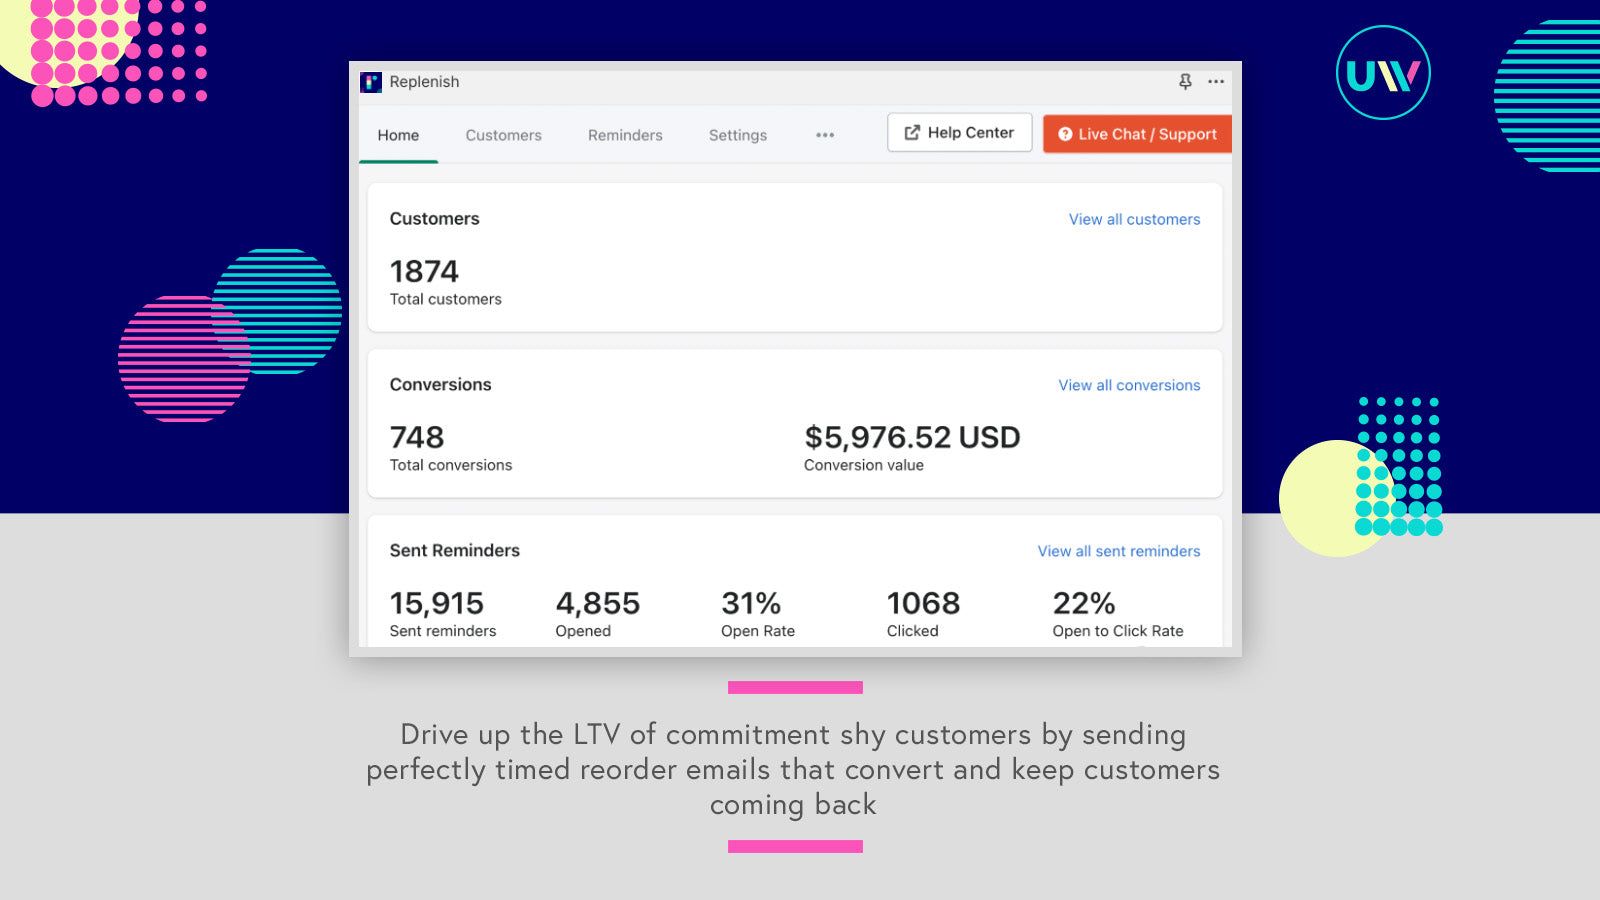 Convert more orders into returning customers